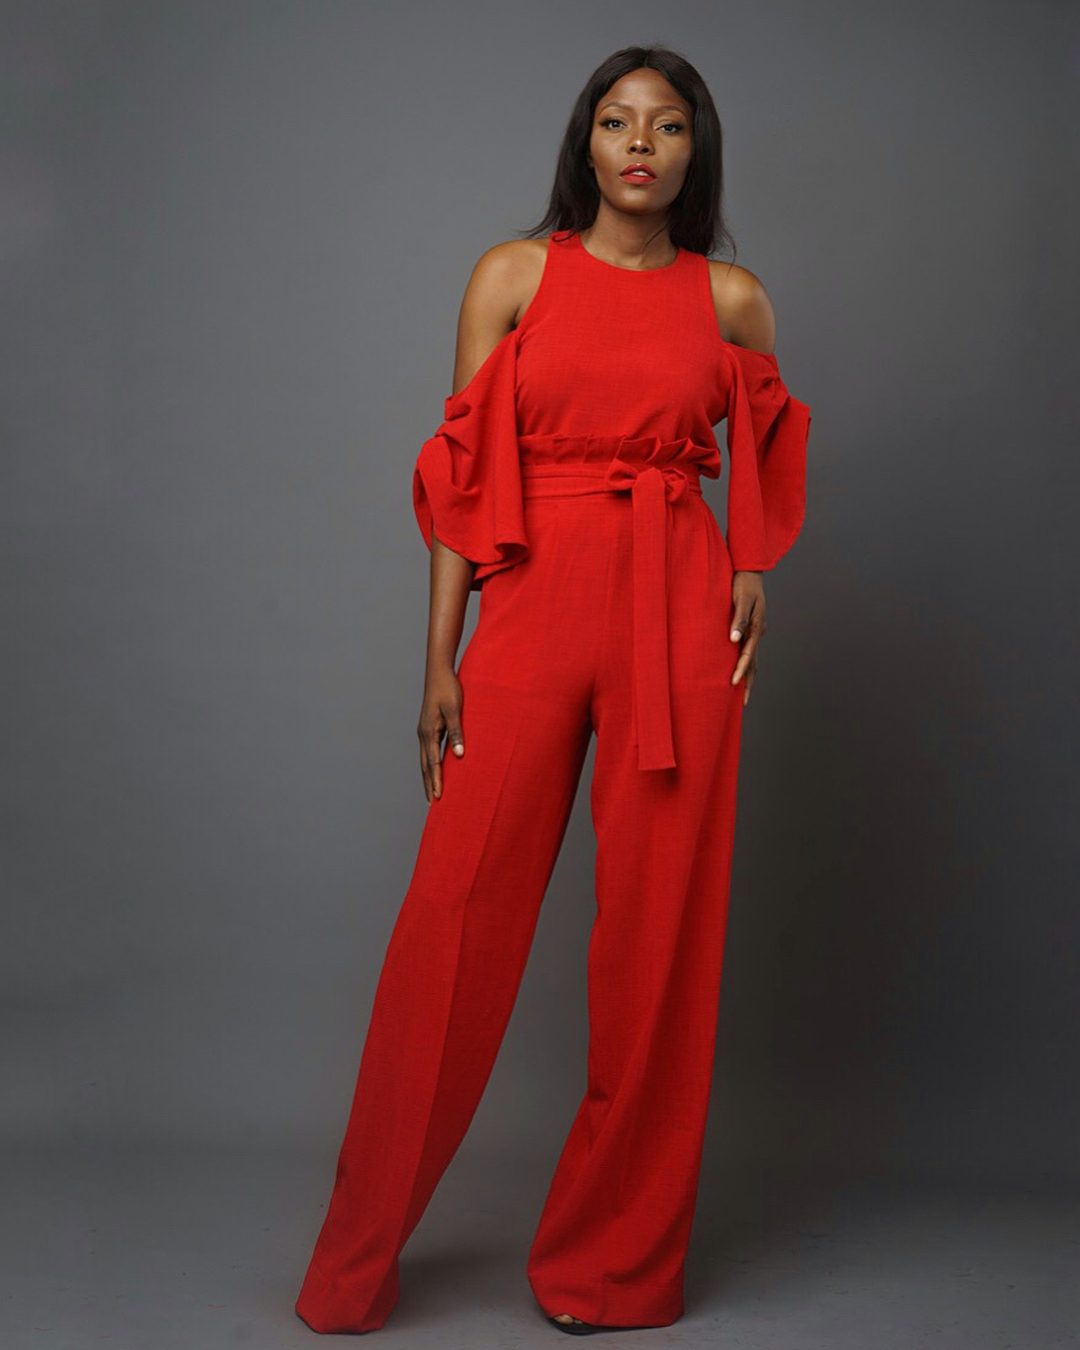 Stunning Red Outfits You Can Rock This Holiday Season